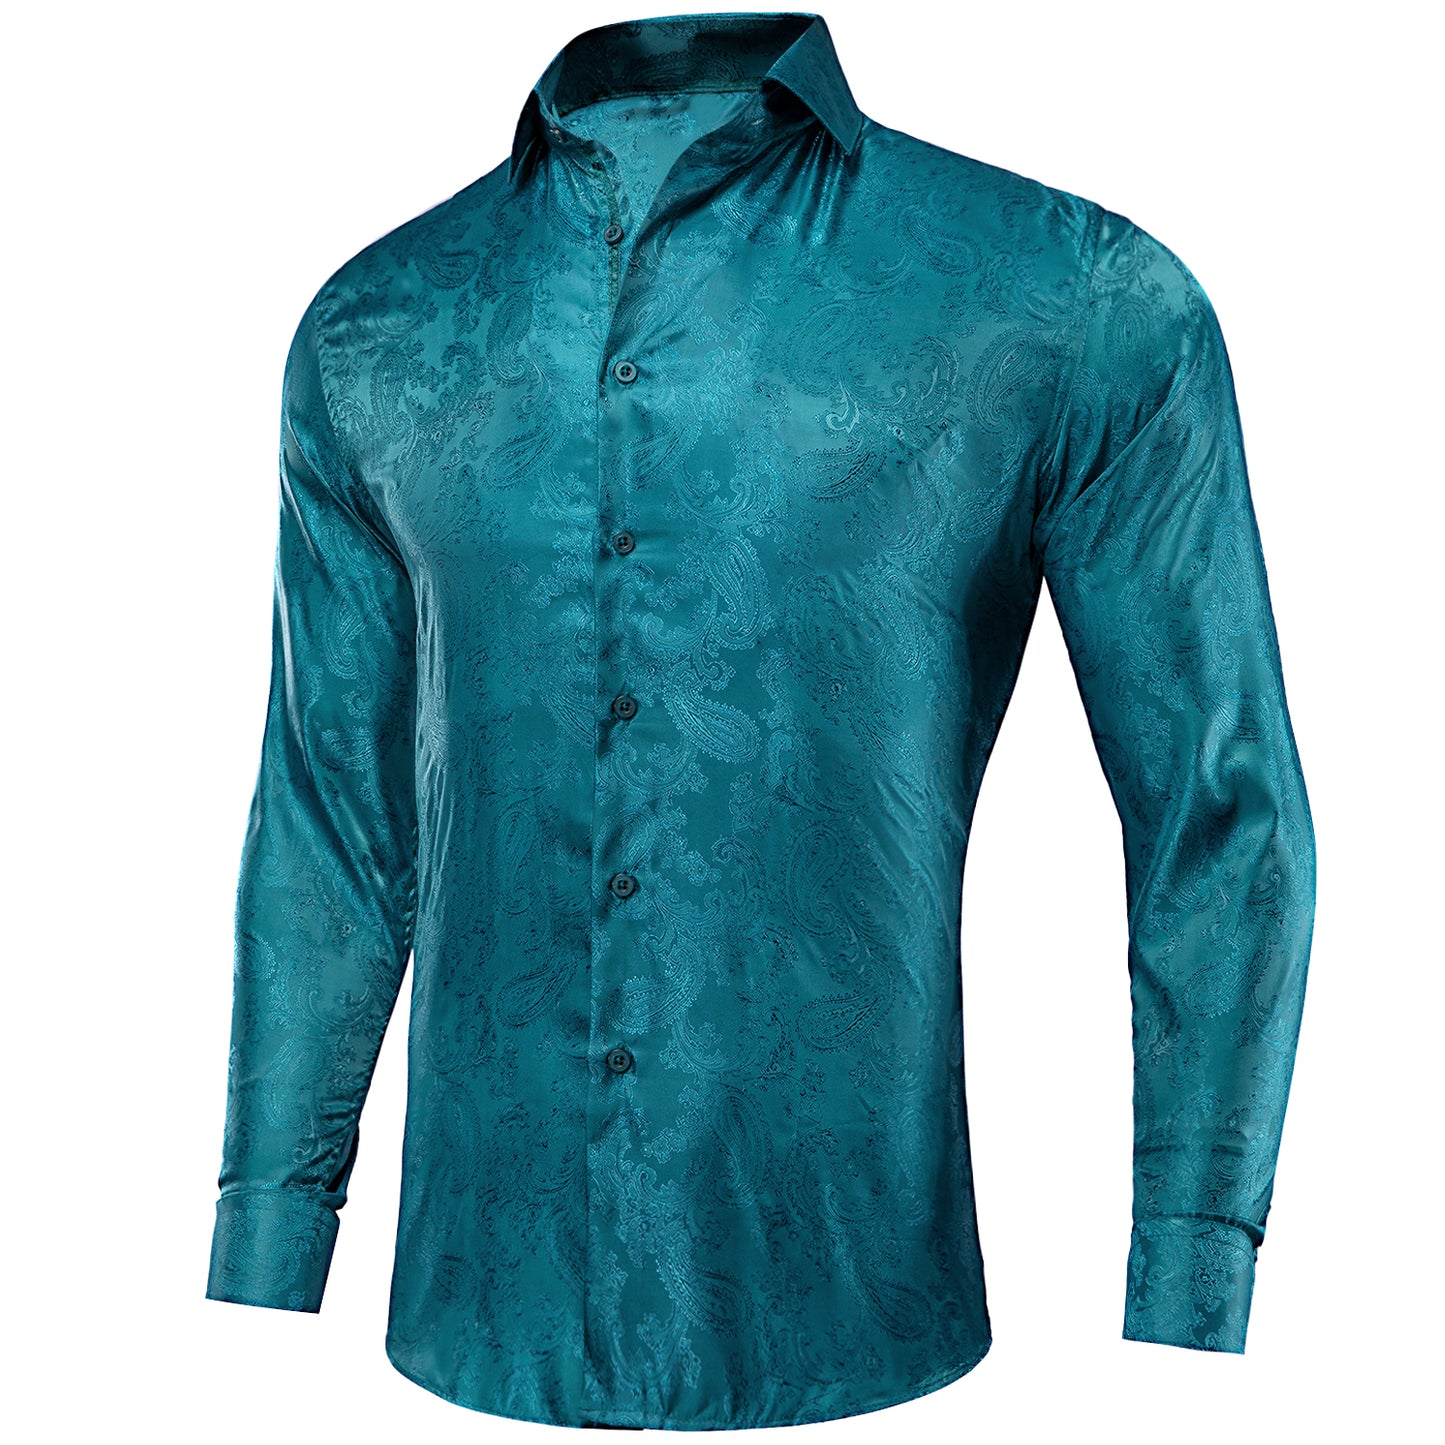 Novelty Silky Shirt - Teal Nuts